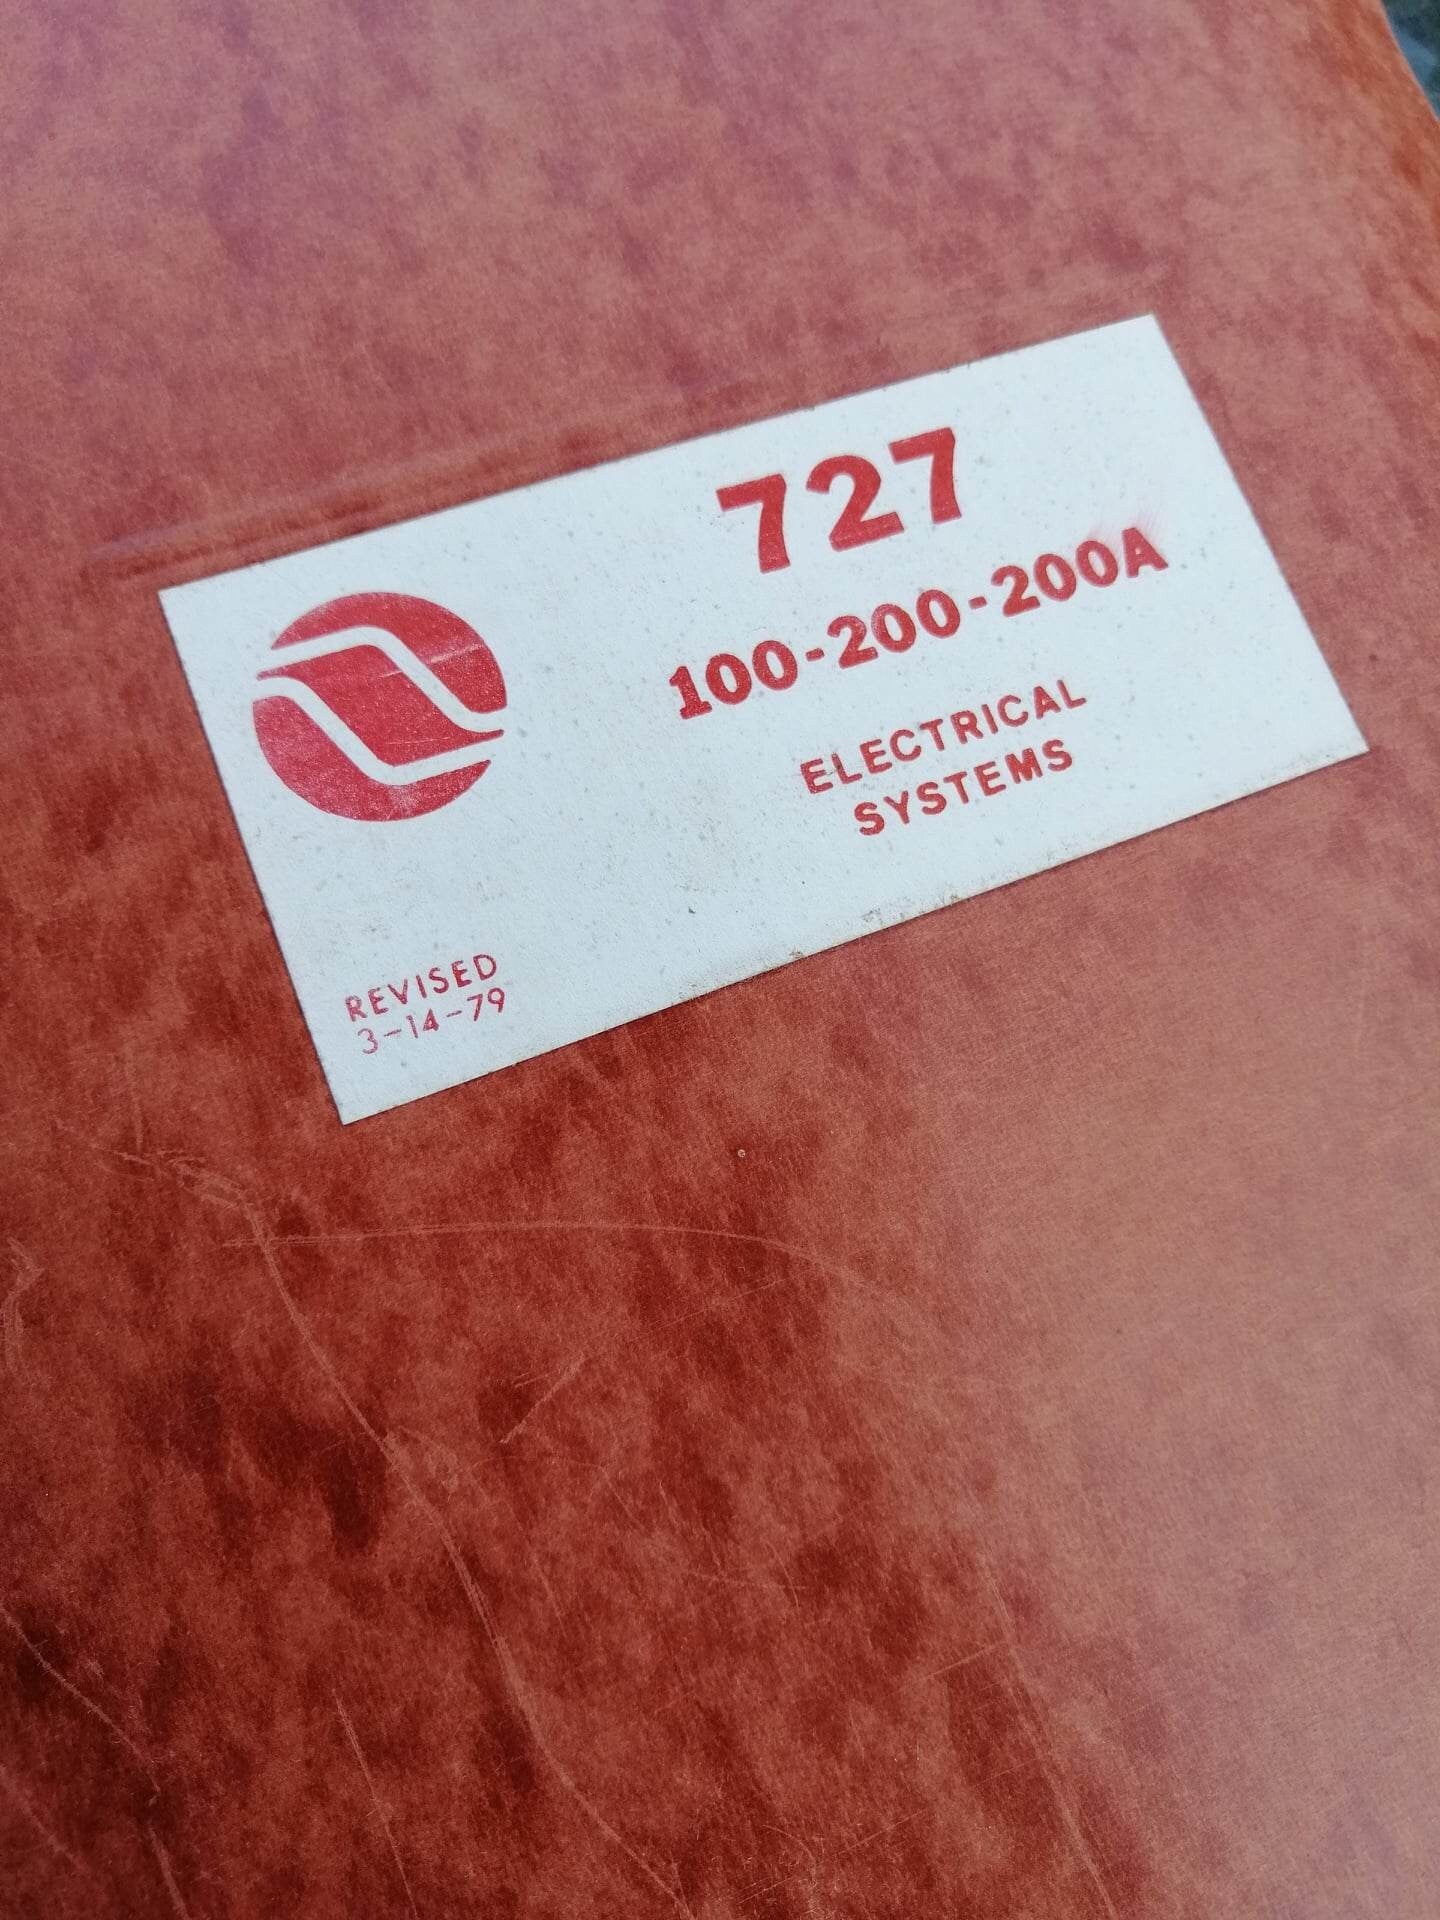 Original Boeing 727 Maintance Manual: 100-200-200A Electrical Systems | Nortwest Orient | Northwest Airlines